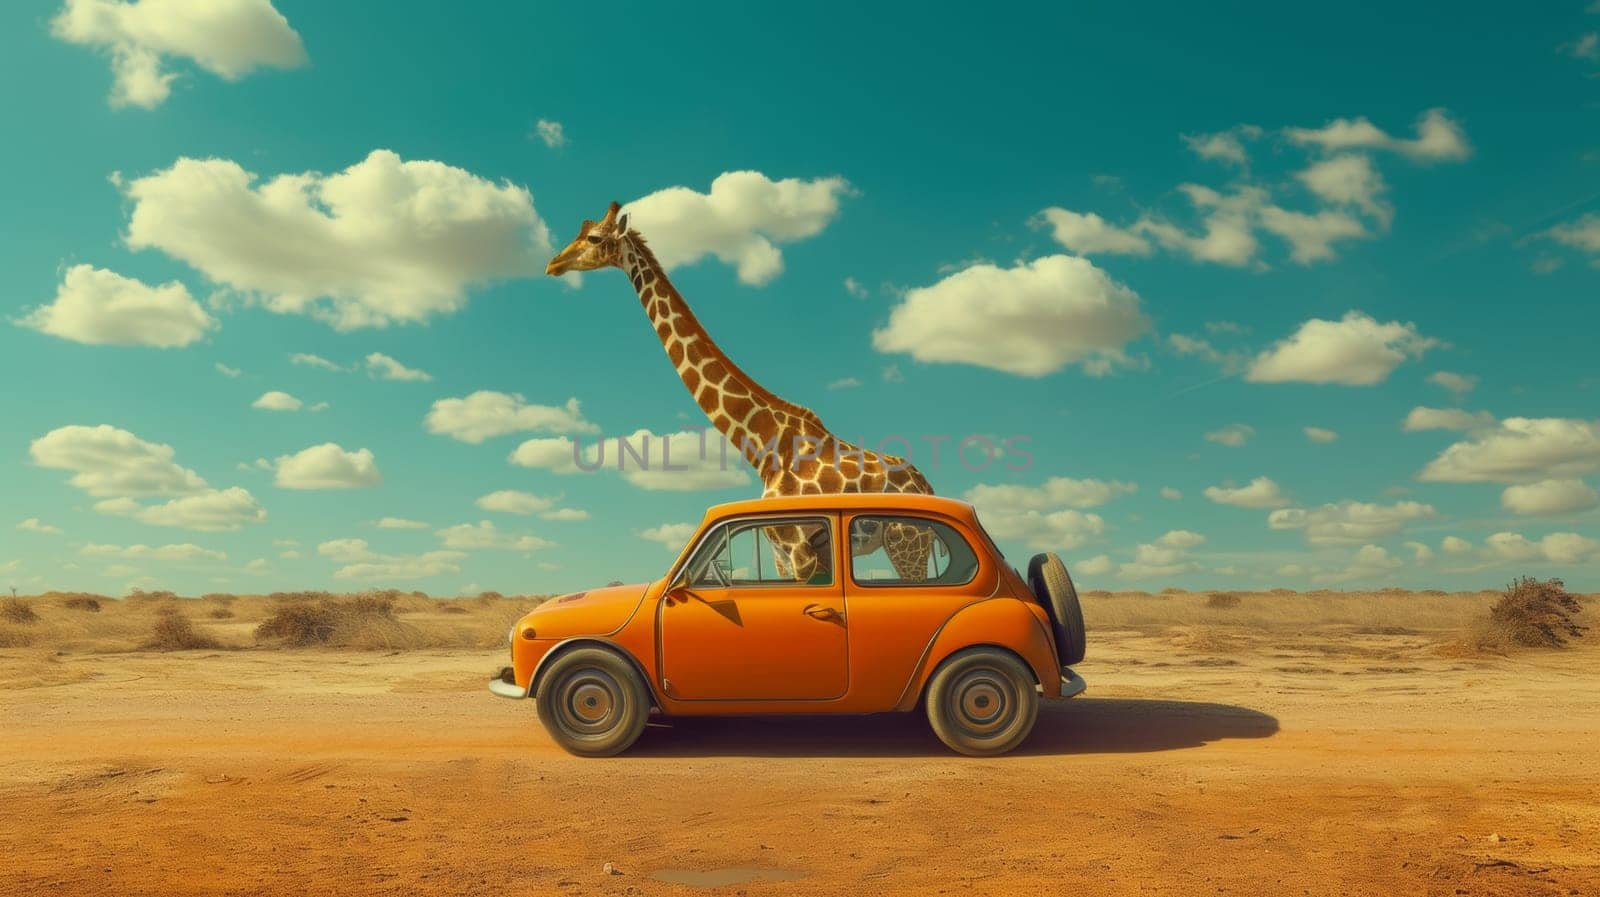 A giraffe standing in front of a small orange car